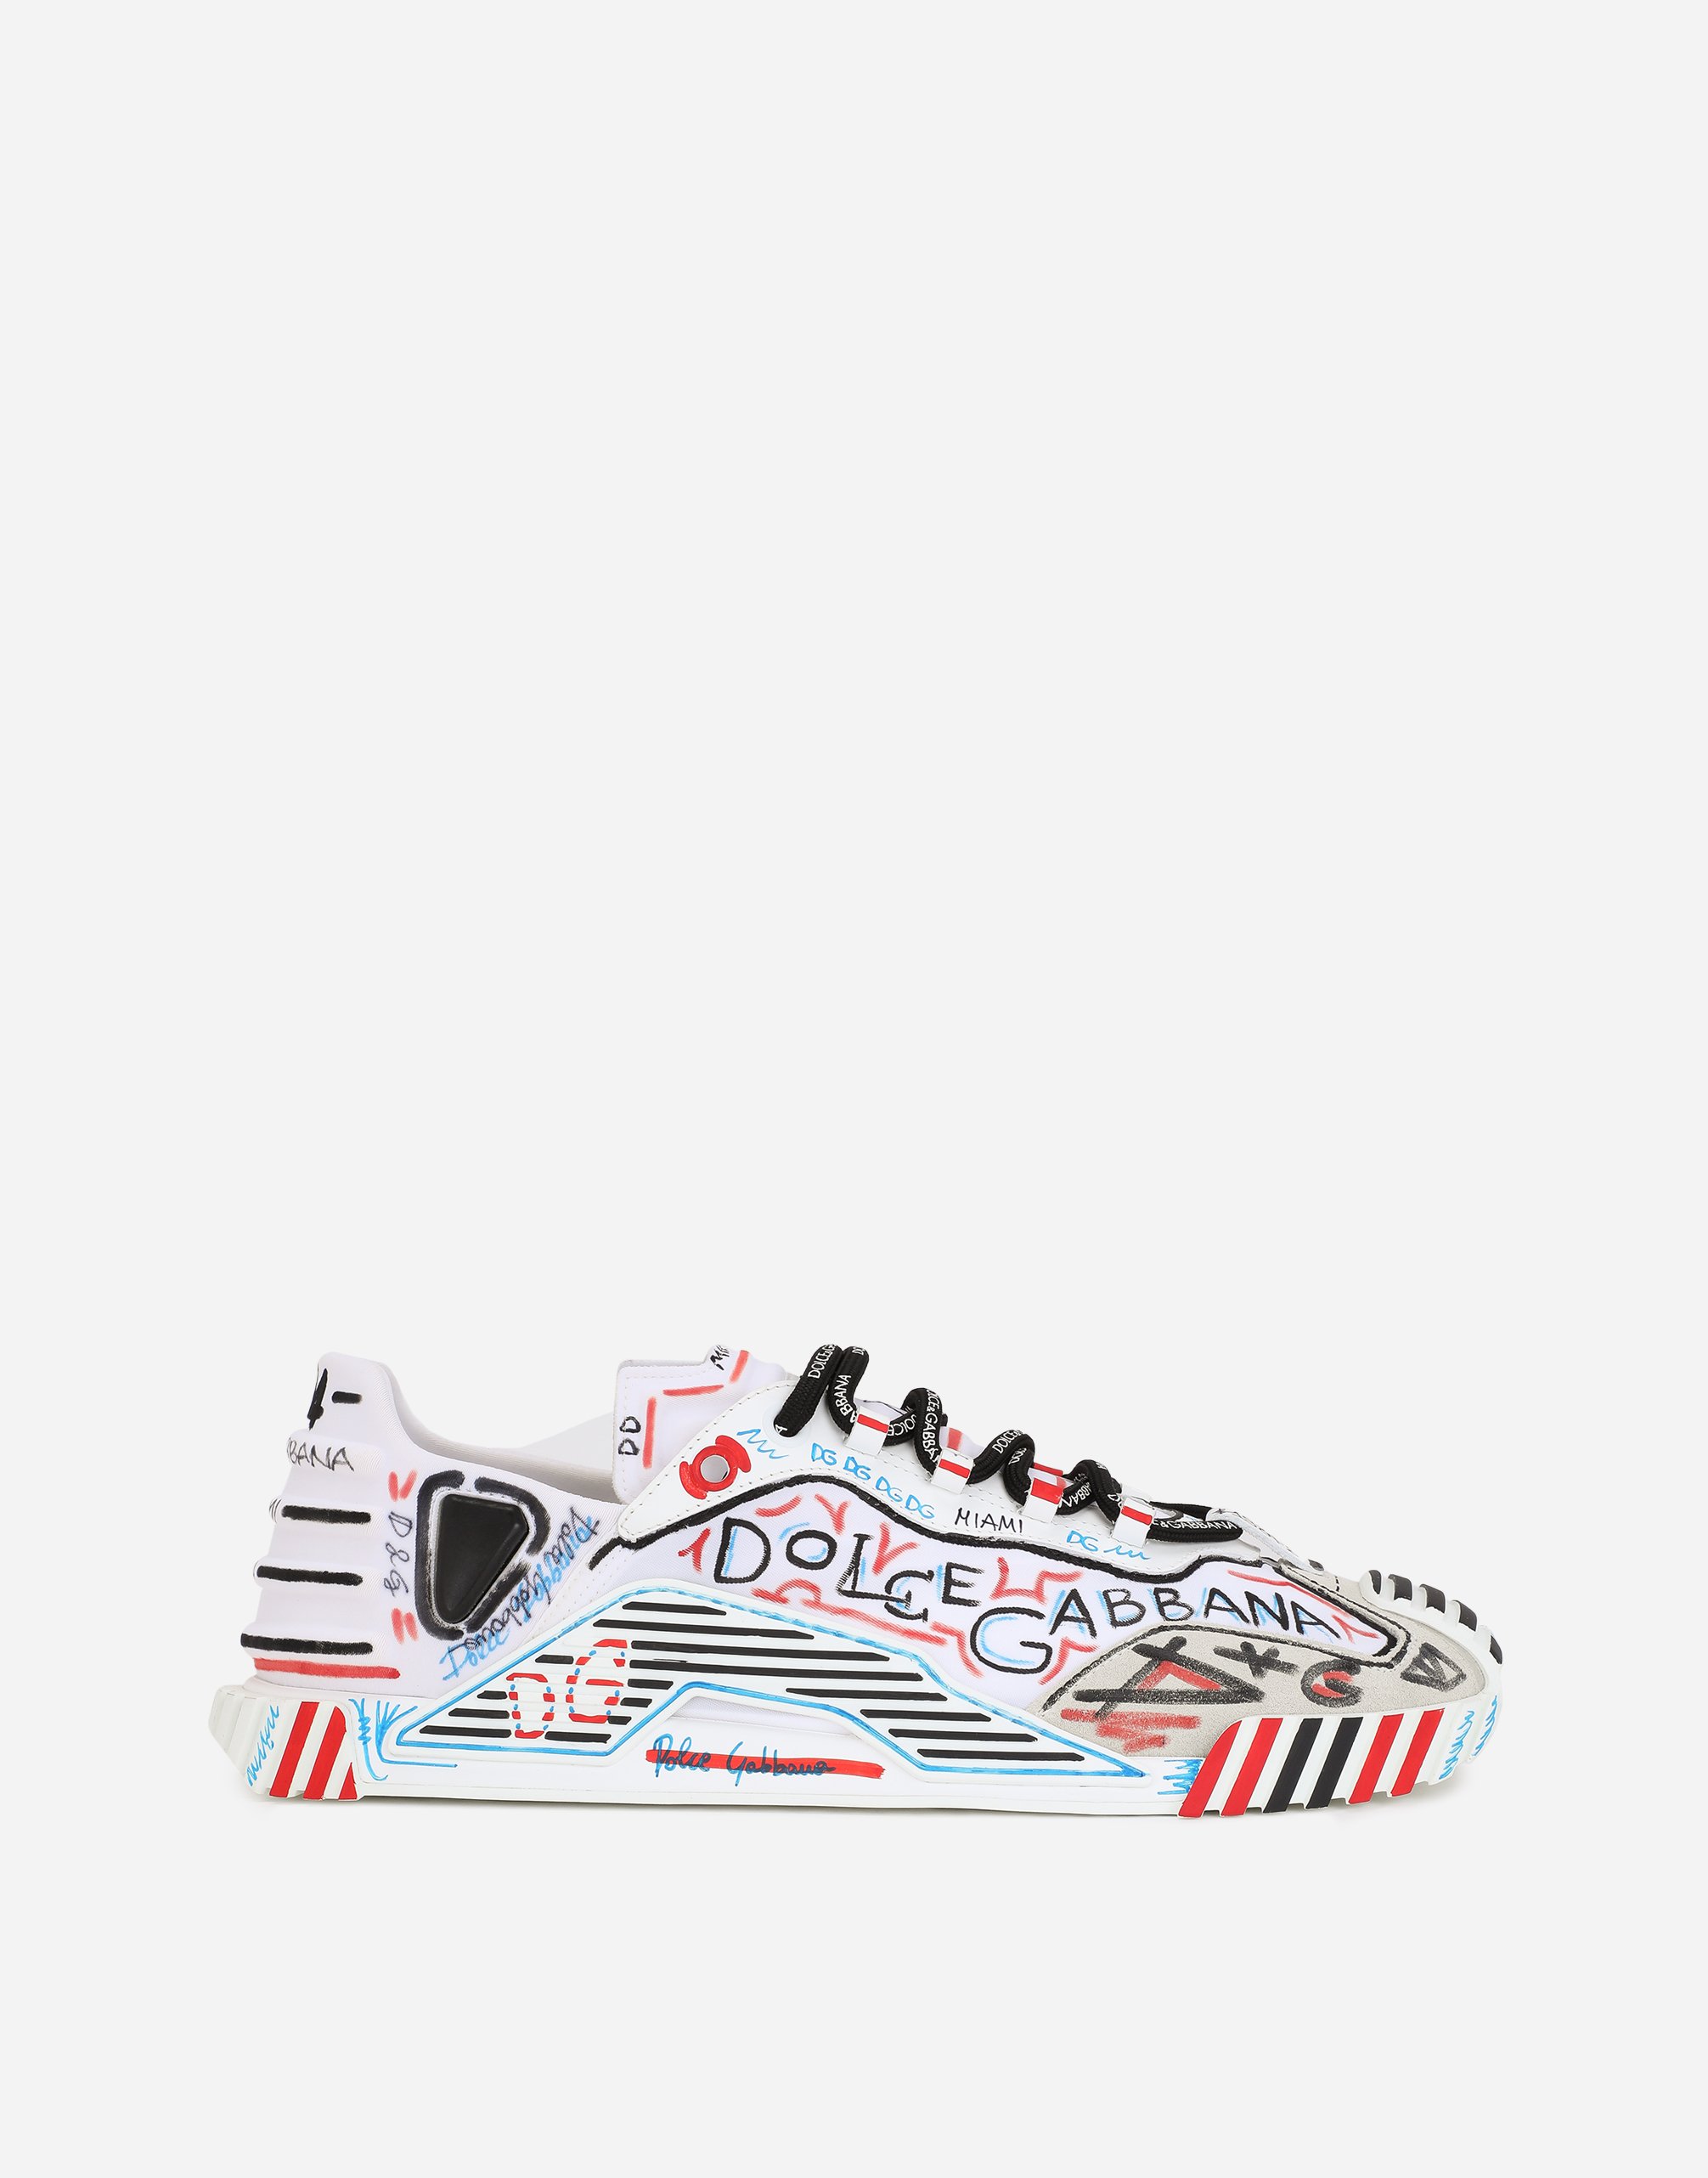 Mixed-materials Los Angeles NS1 slip-on sneakers in Miami